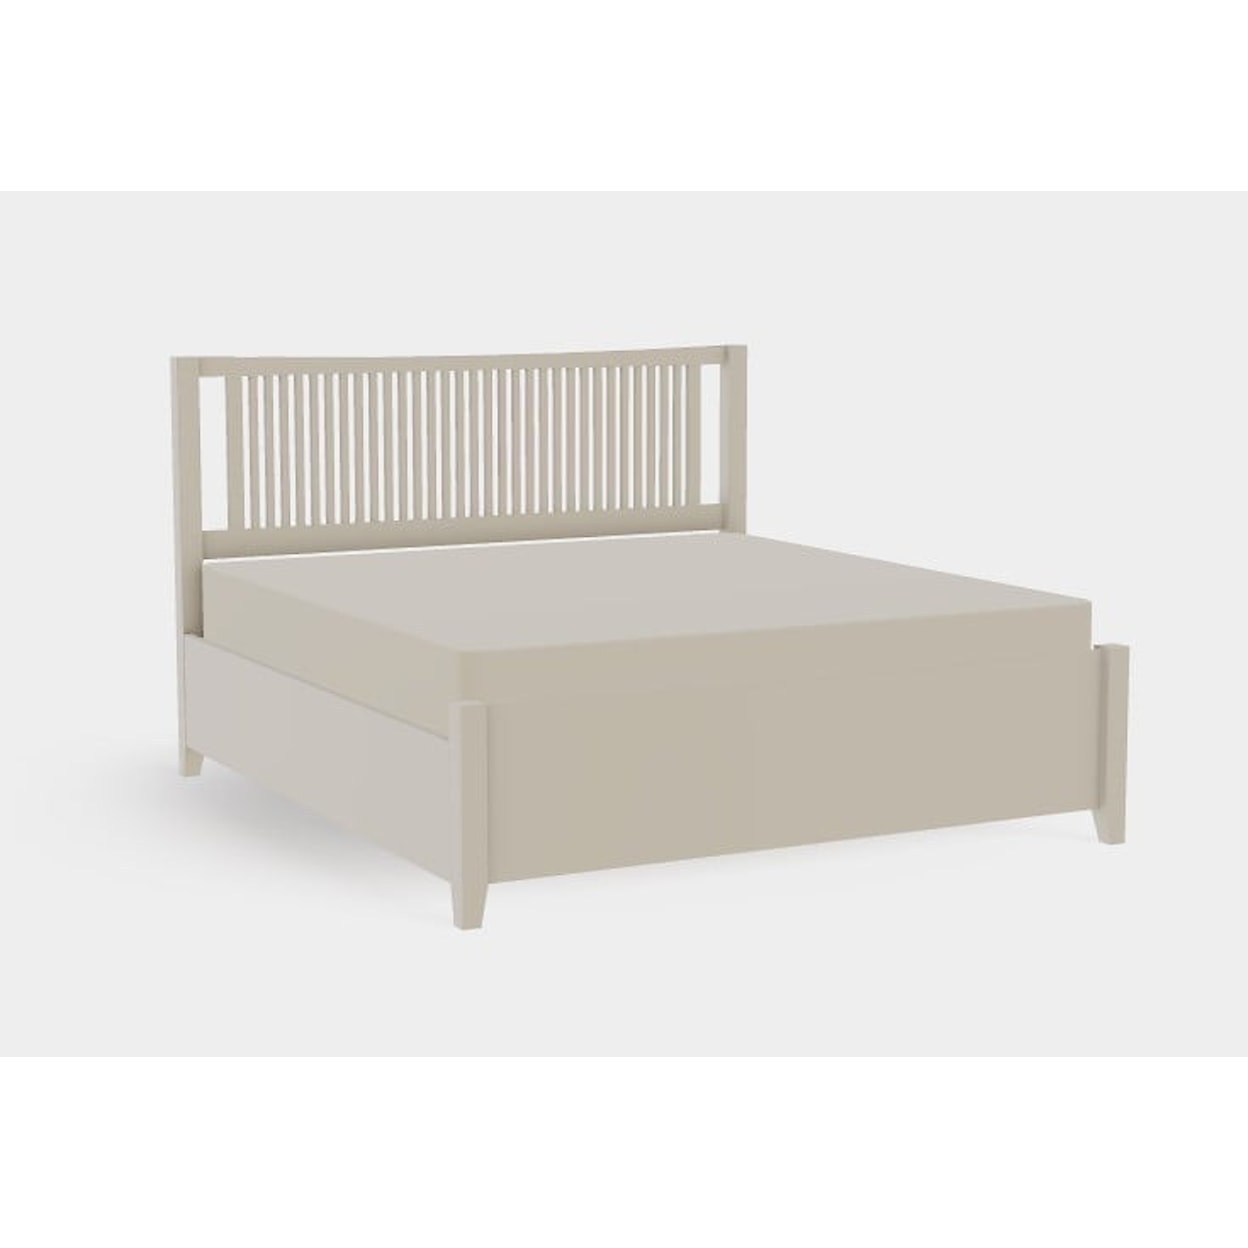 Mavin Atwood Group Atwood King Right Drawerside Spindle Bed